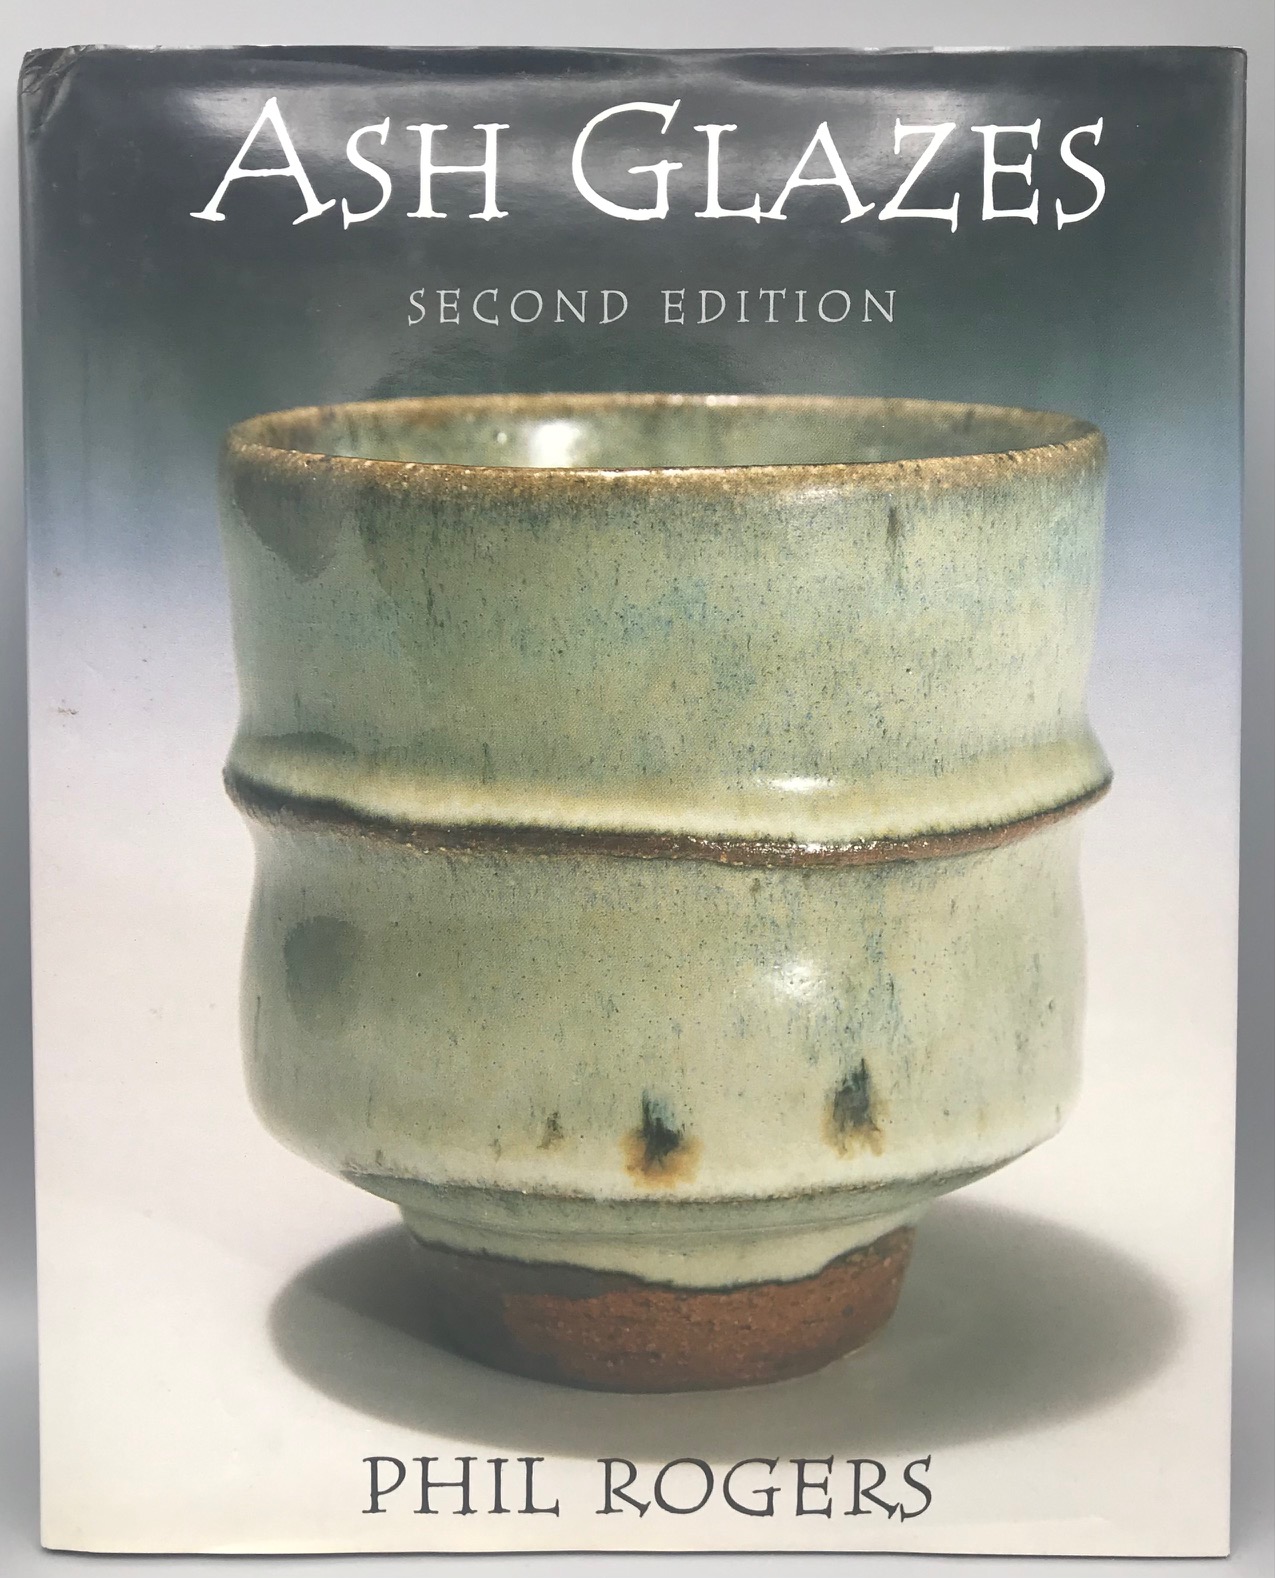 ASH GLAZES, by Phil Rogers - 2003 [Signed, 2nd Ed.]